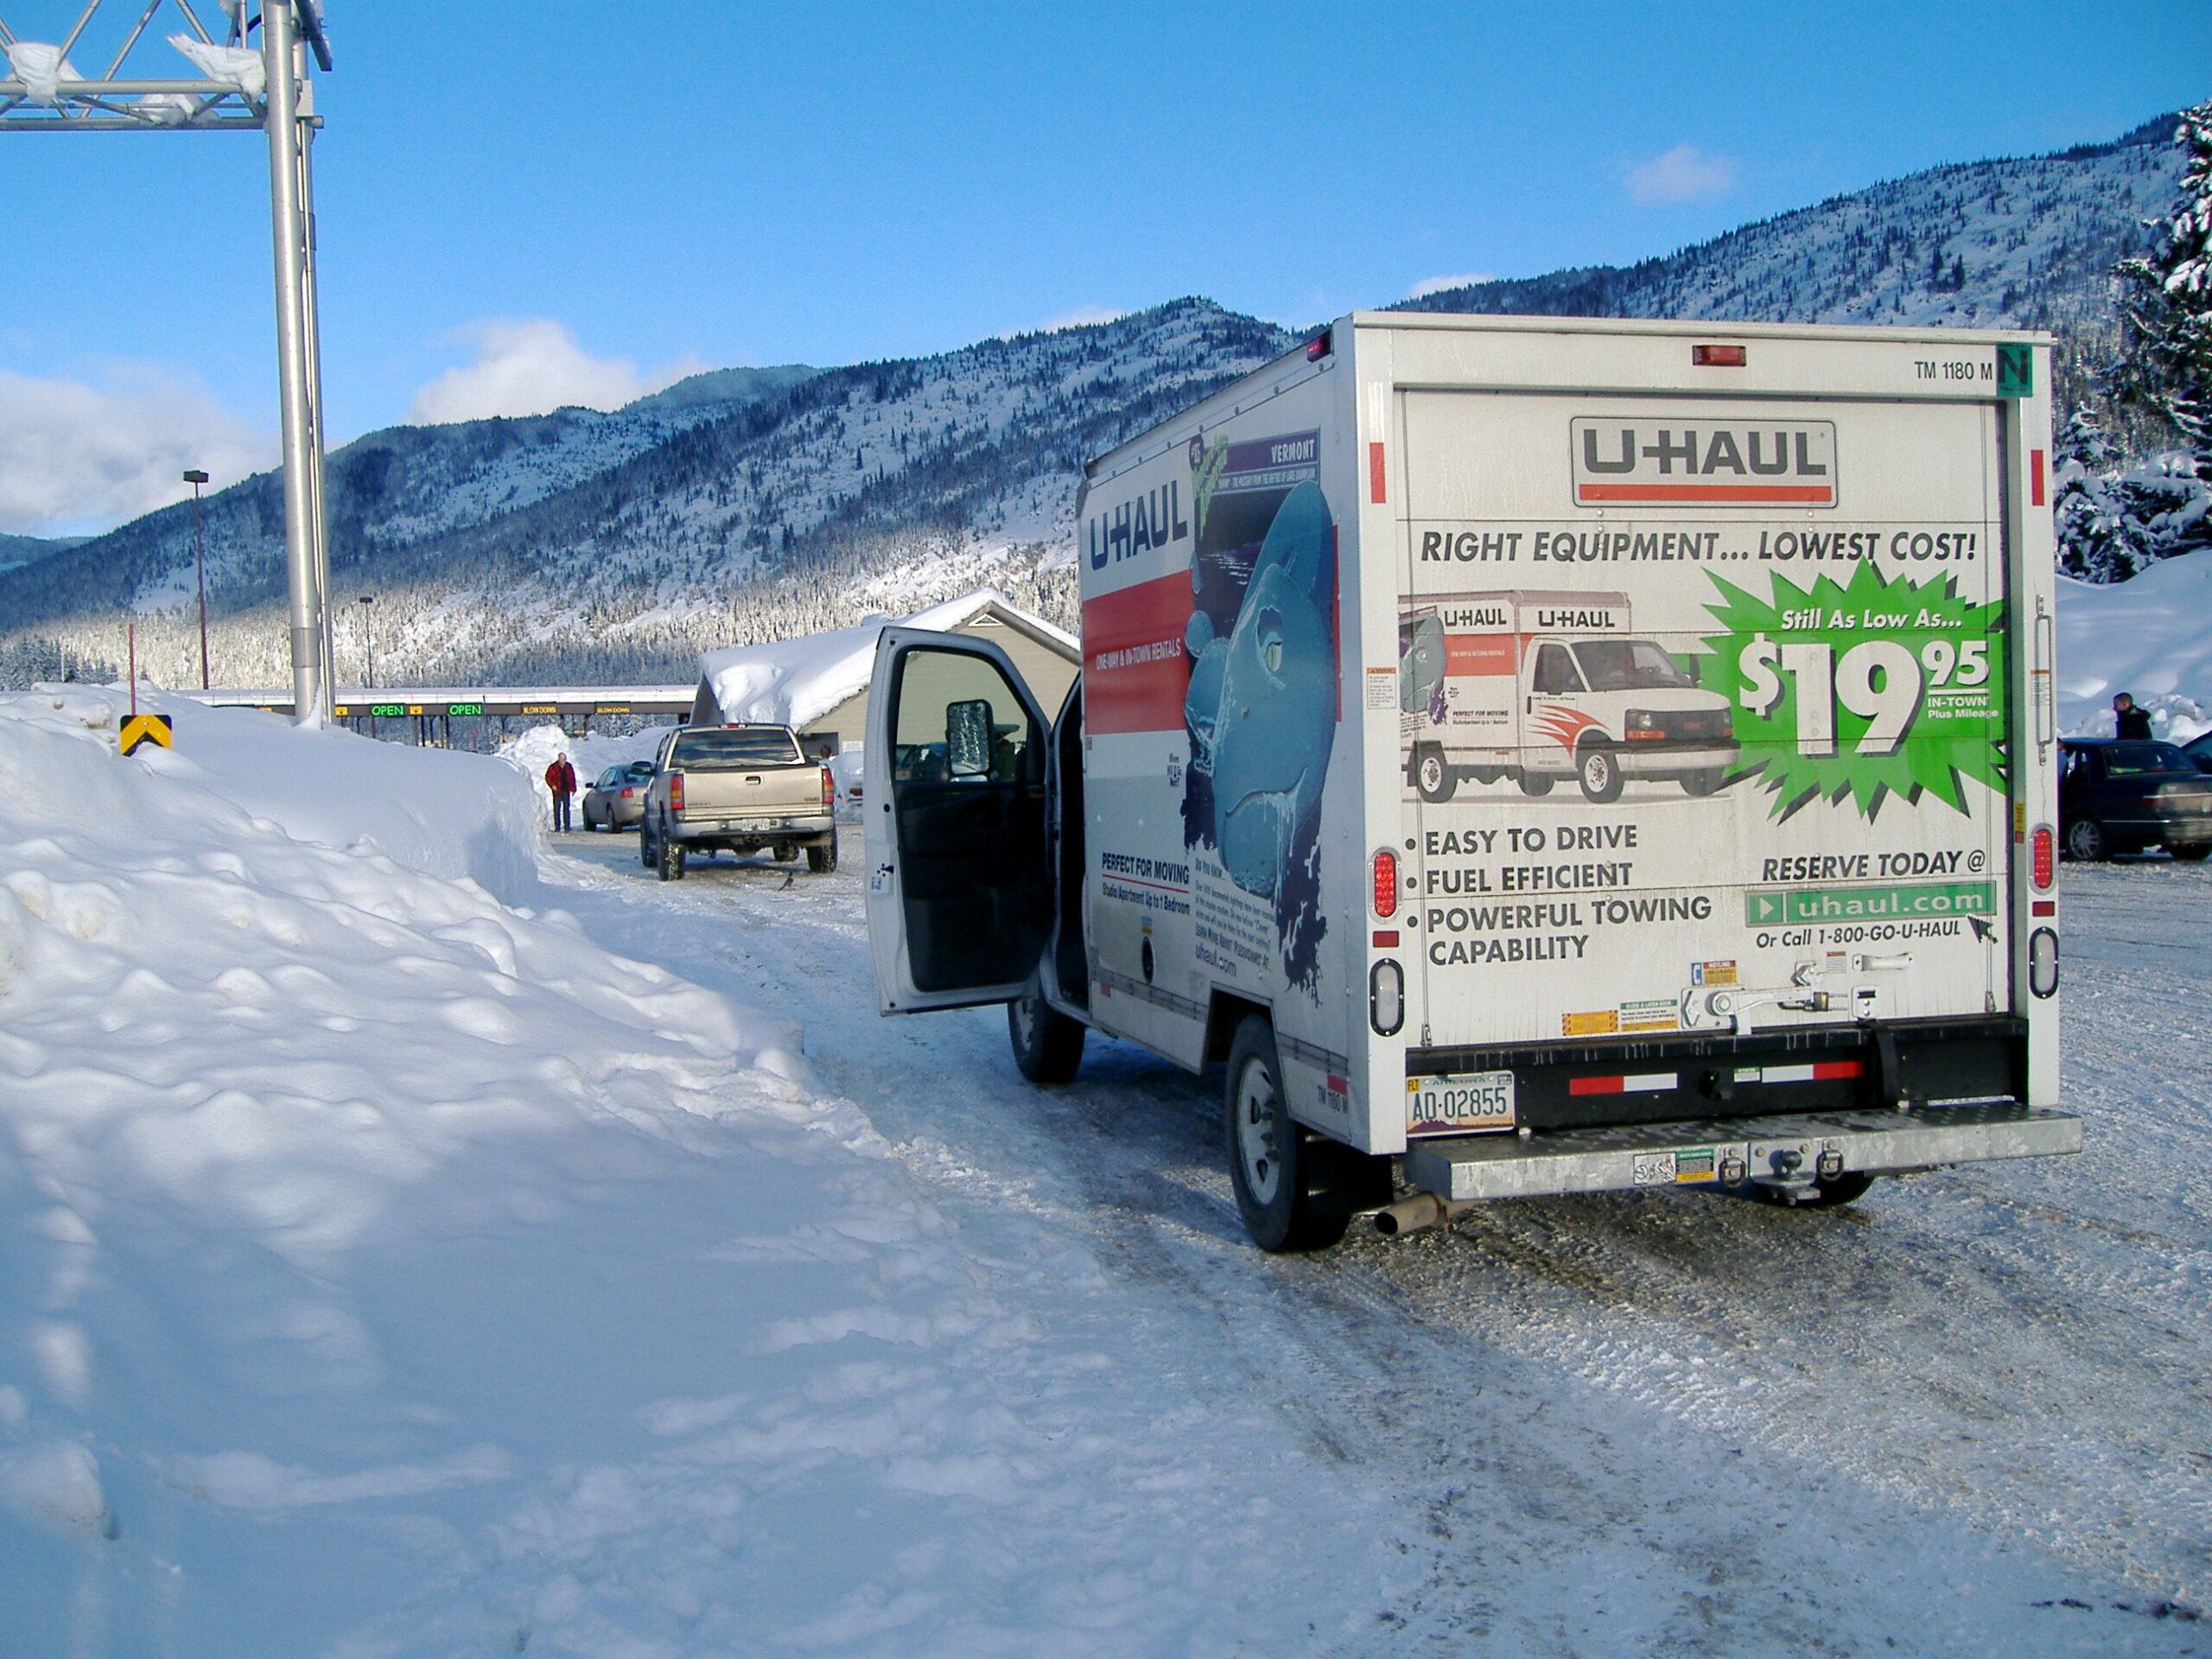 About U-Haul’s In-Town Rental